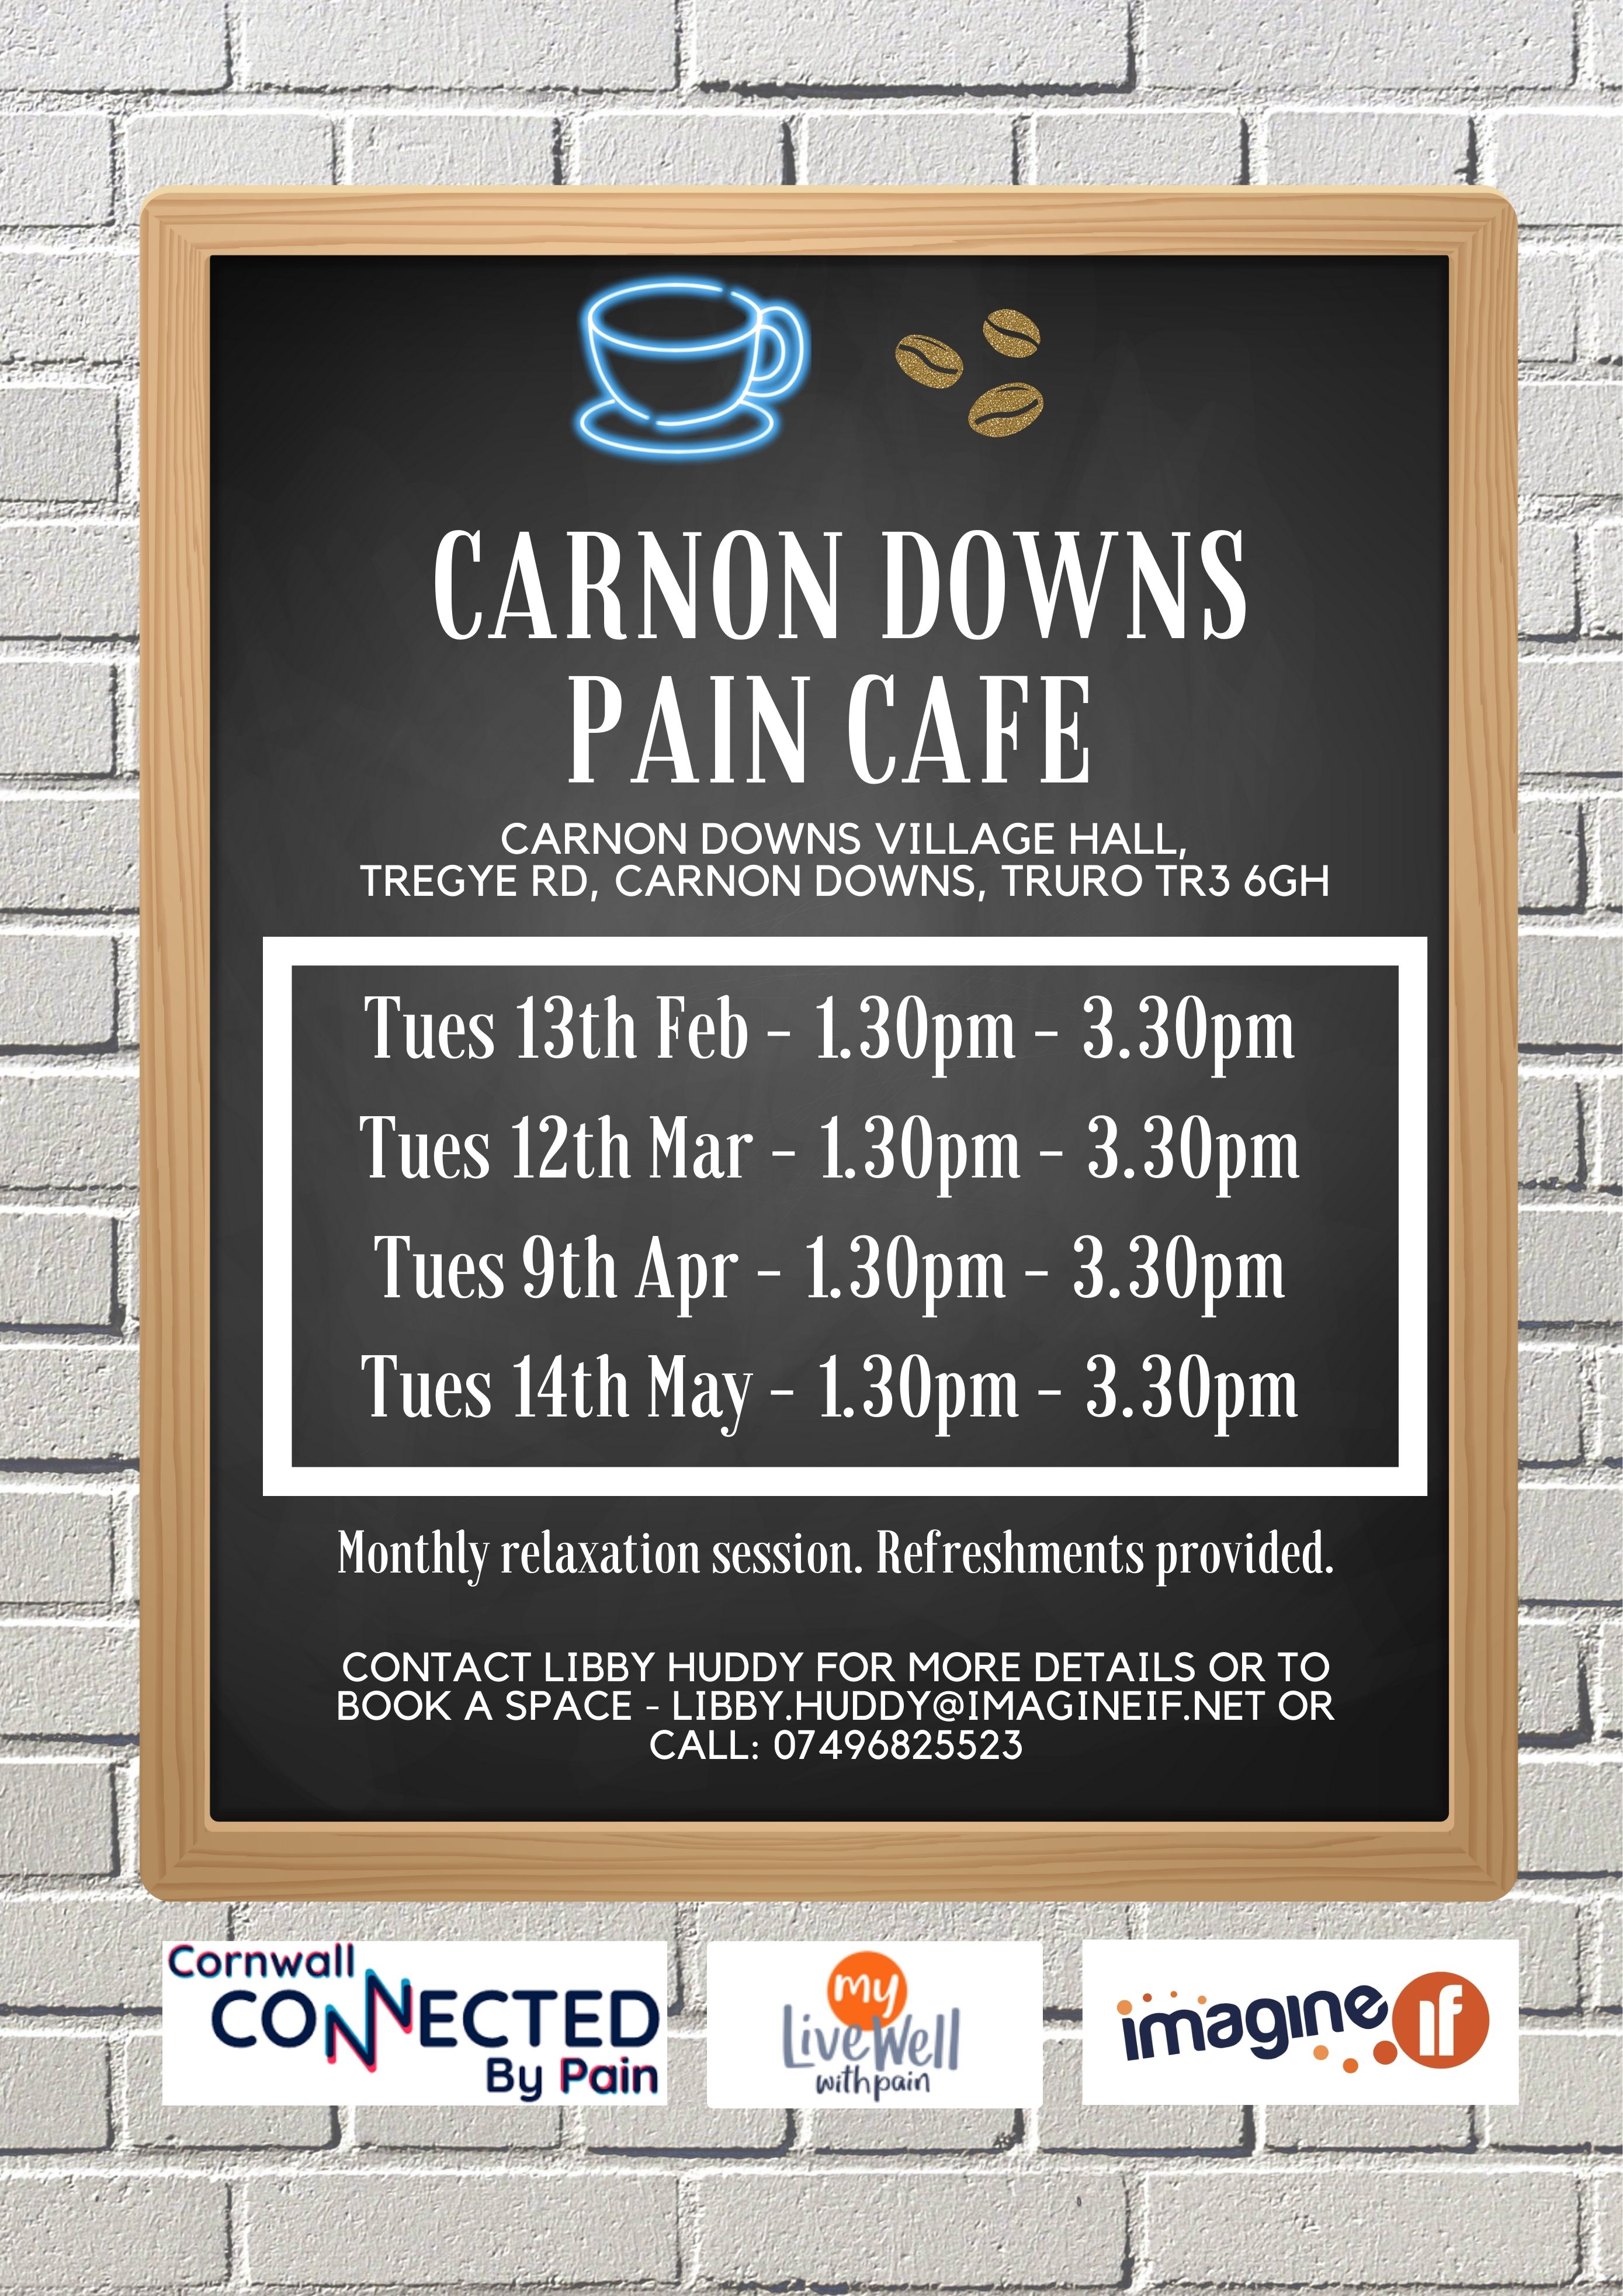 Carnon Downs Pain Cafe